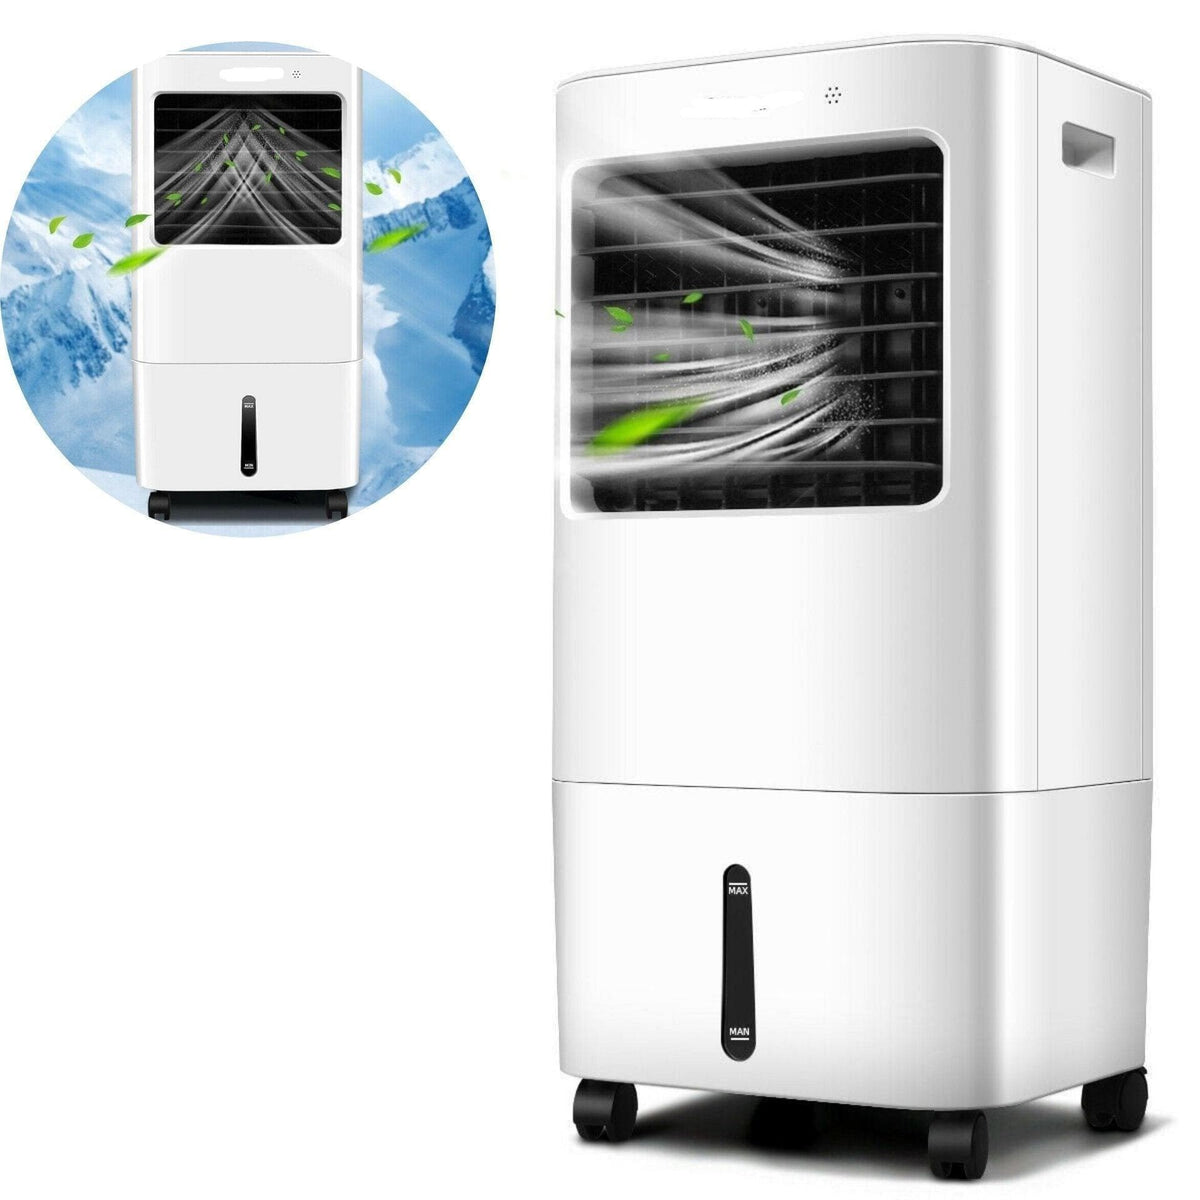 Portable Air Conditioner Stand Up Room Cooler Indoor AC Unit(Windowles